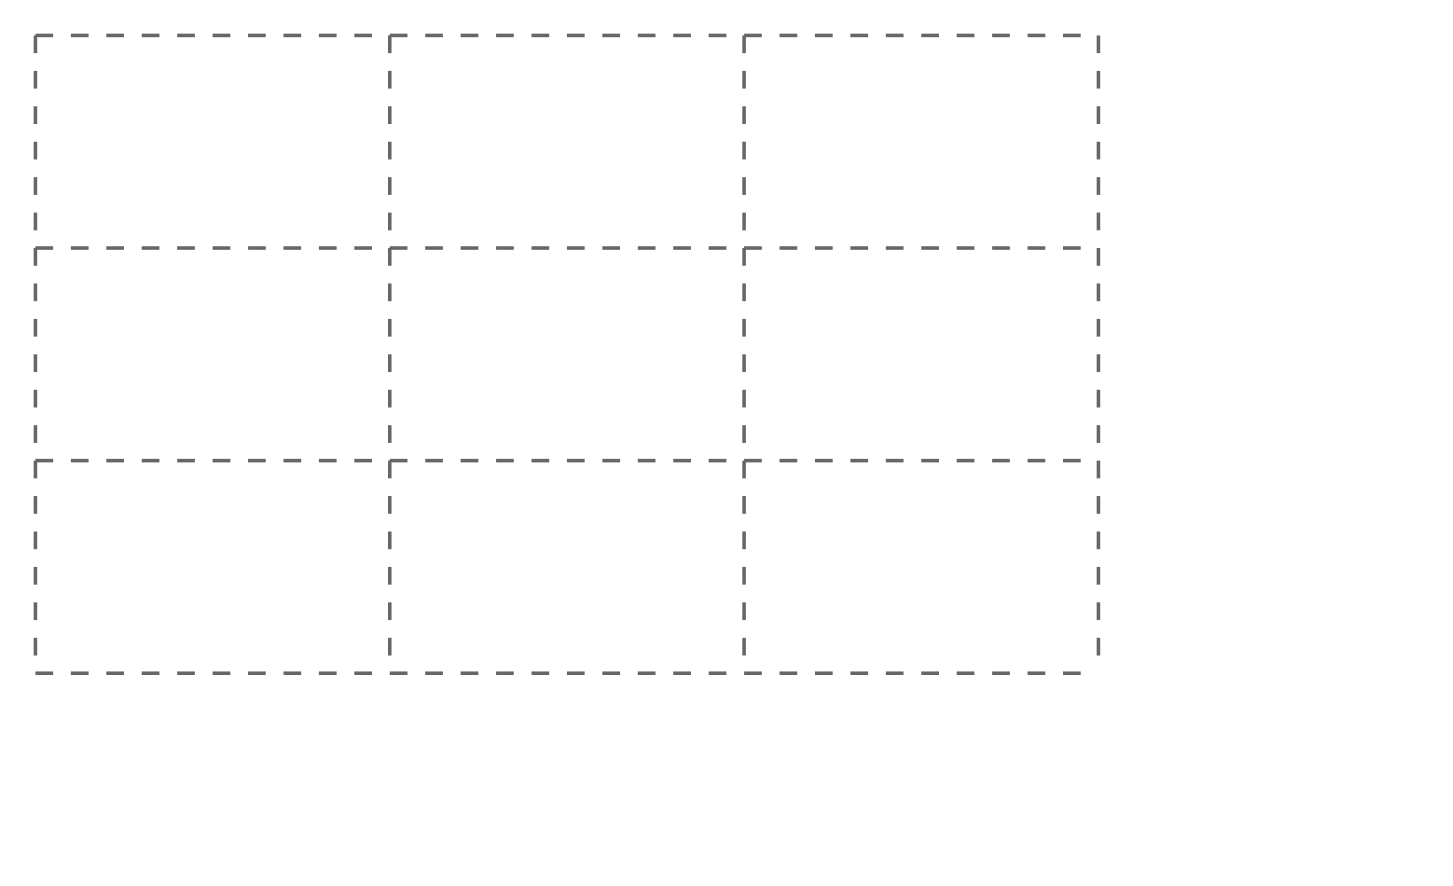 Example animation of how different auto-positioned items are placed in the grid